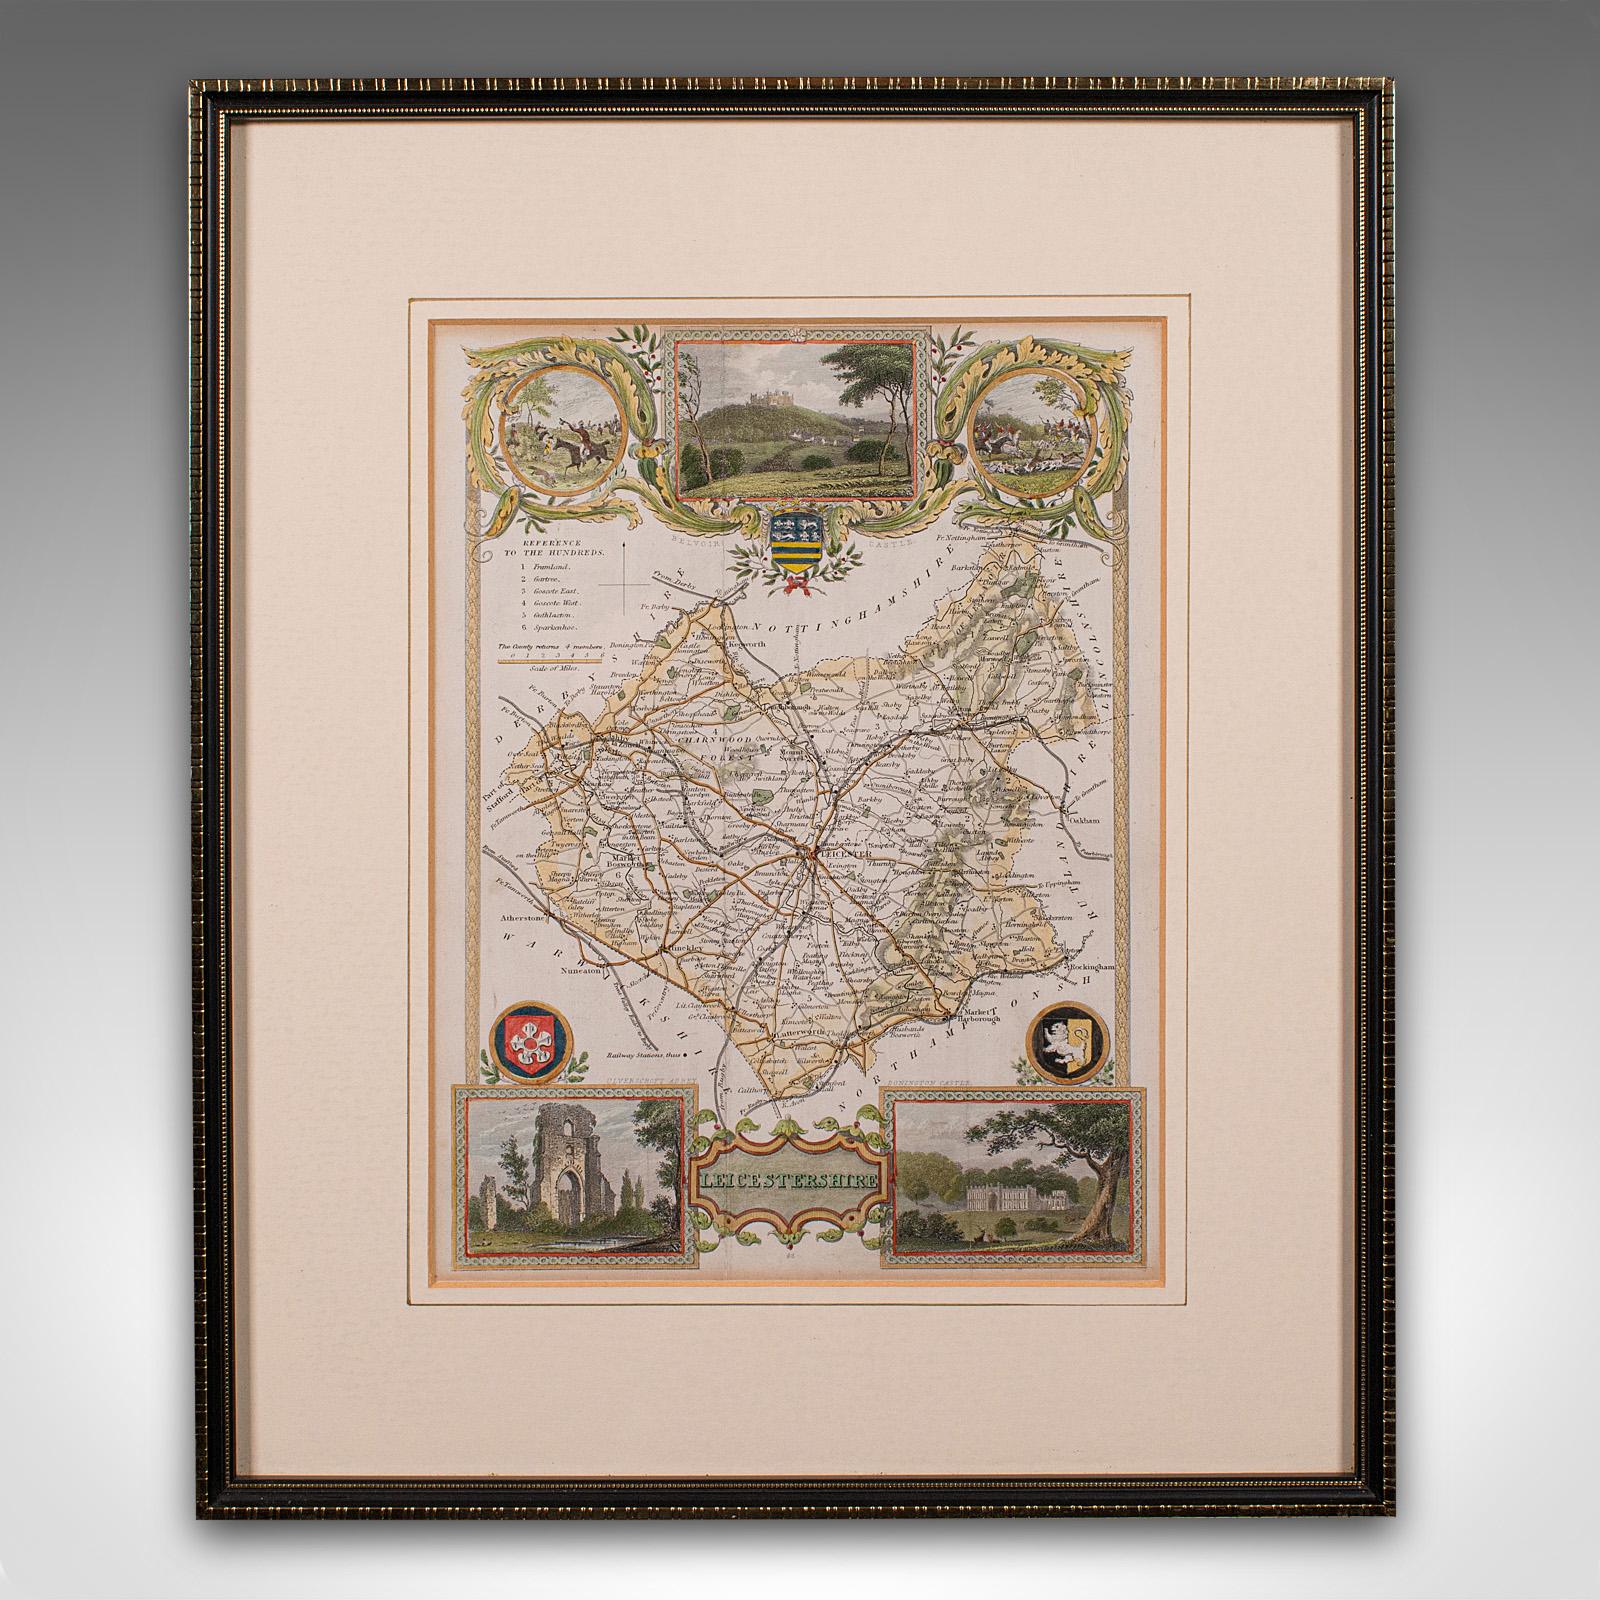 This is an antique lithography map of Leicestershire. An English, framed atlas engraving of cartographic interest, dating to the mid 19th century and later.

Superb lithography of Leicestershire and its county detail, perfect for display
Displaying